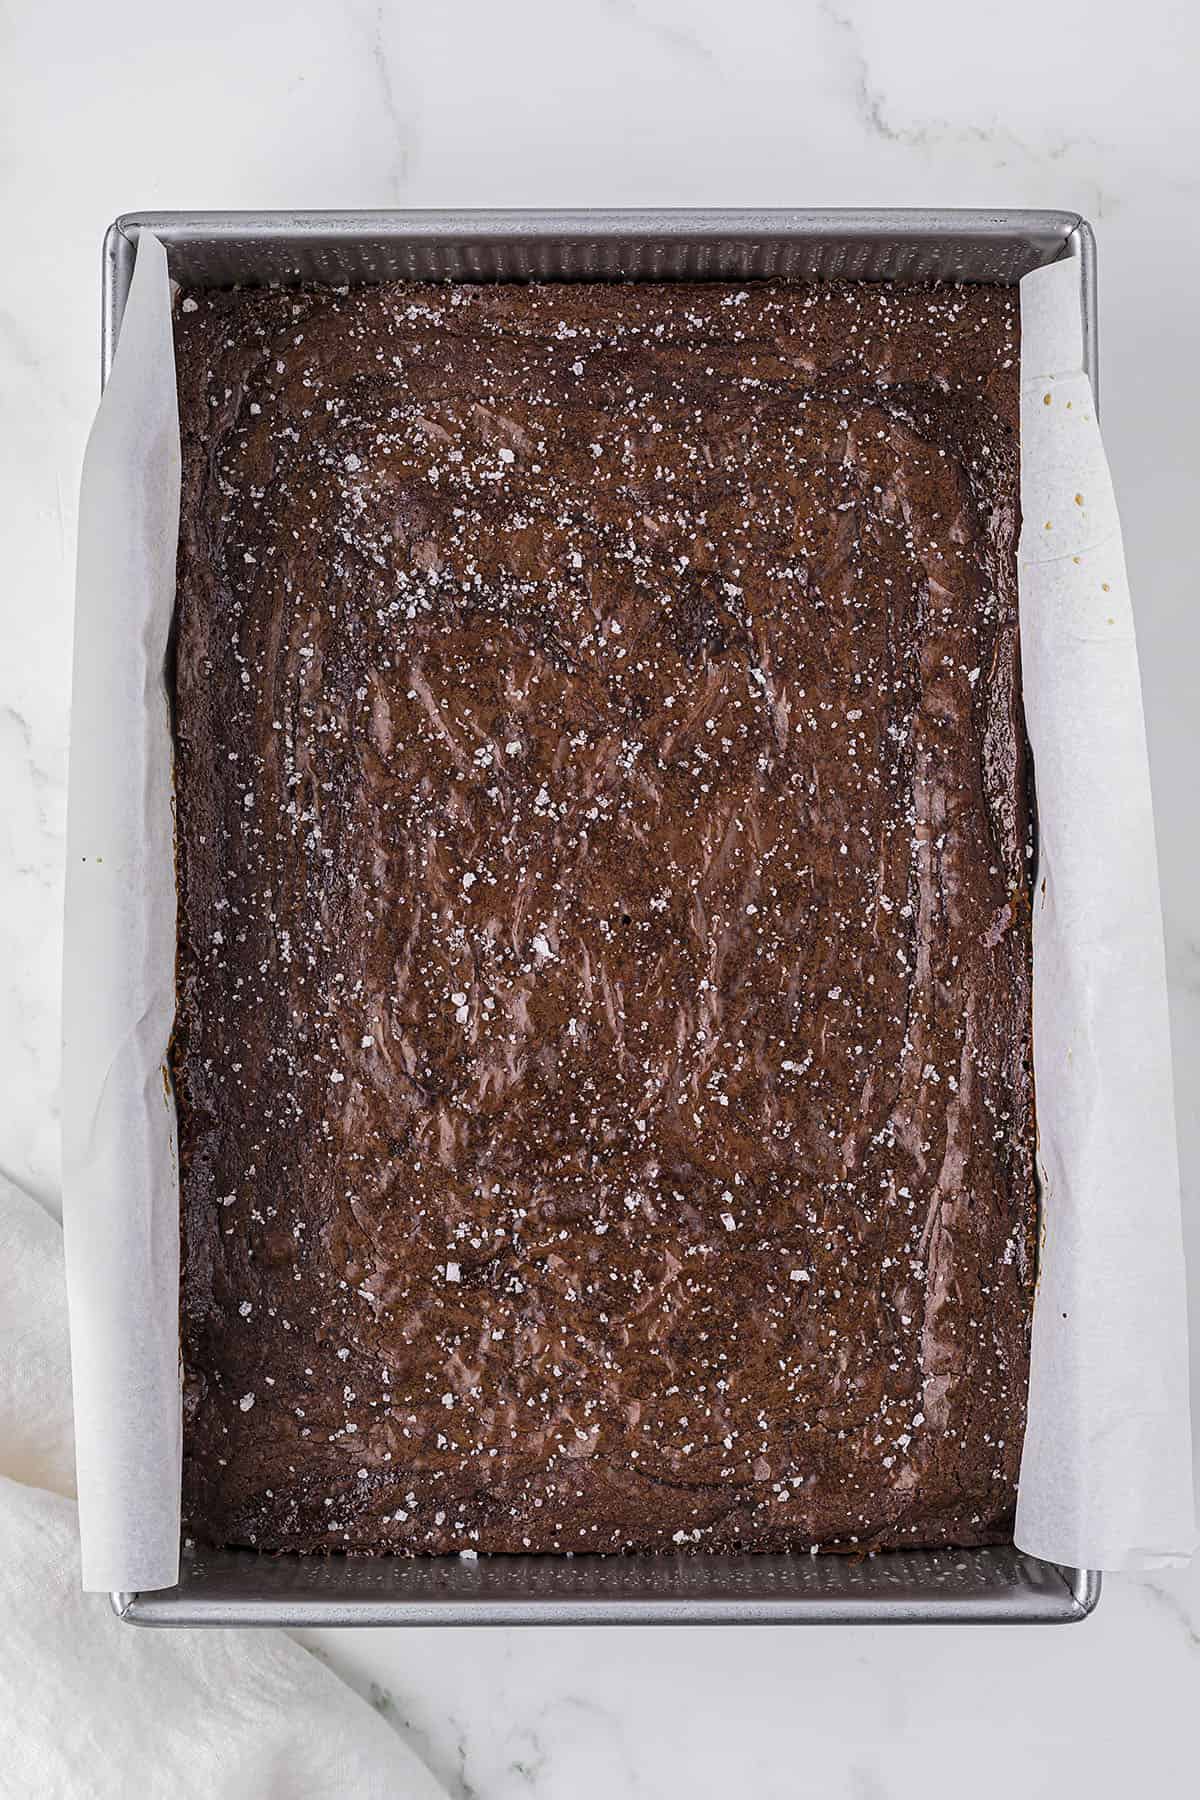 Baked brownies with fleur de sel sprinkled over the top.